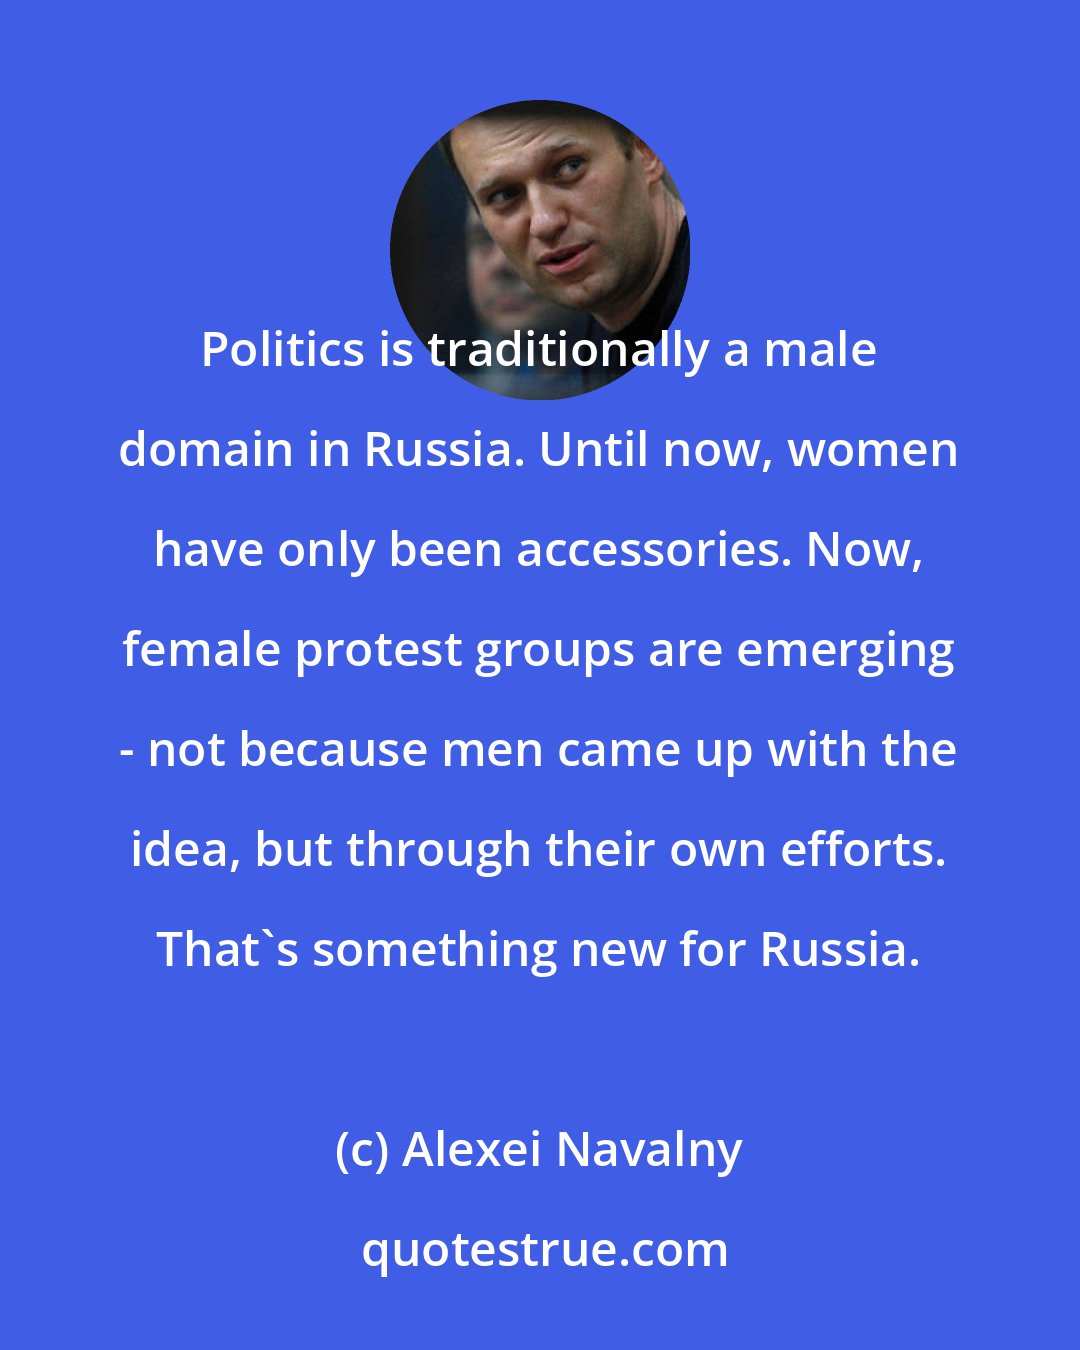 Alexei Navalny: Politics is traditionally a male domain in Russia. Until now, women have only been accessories. Now, female protest groups are emerging - not because men came up with the idea, but through their own efforts. That's something new for Russia.